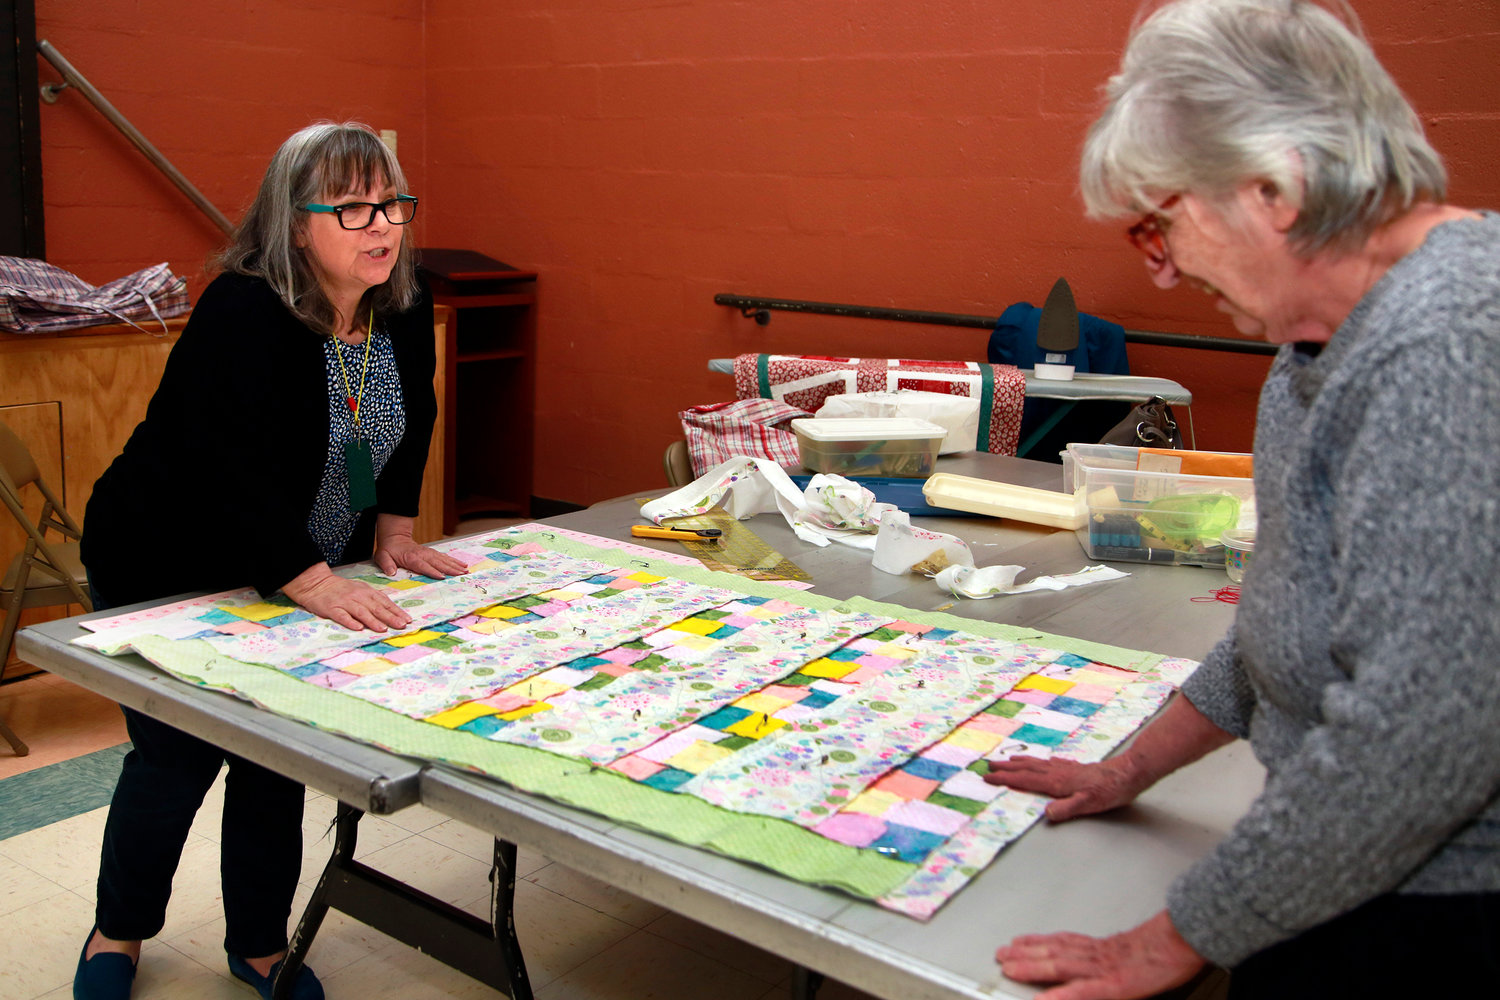 Kim Chiusano and Paula Mazzola worked on a quilt last week.